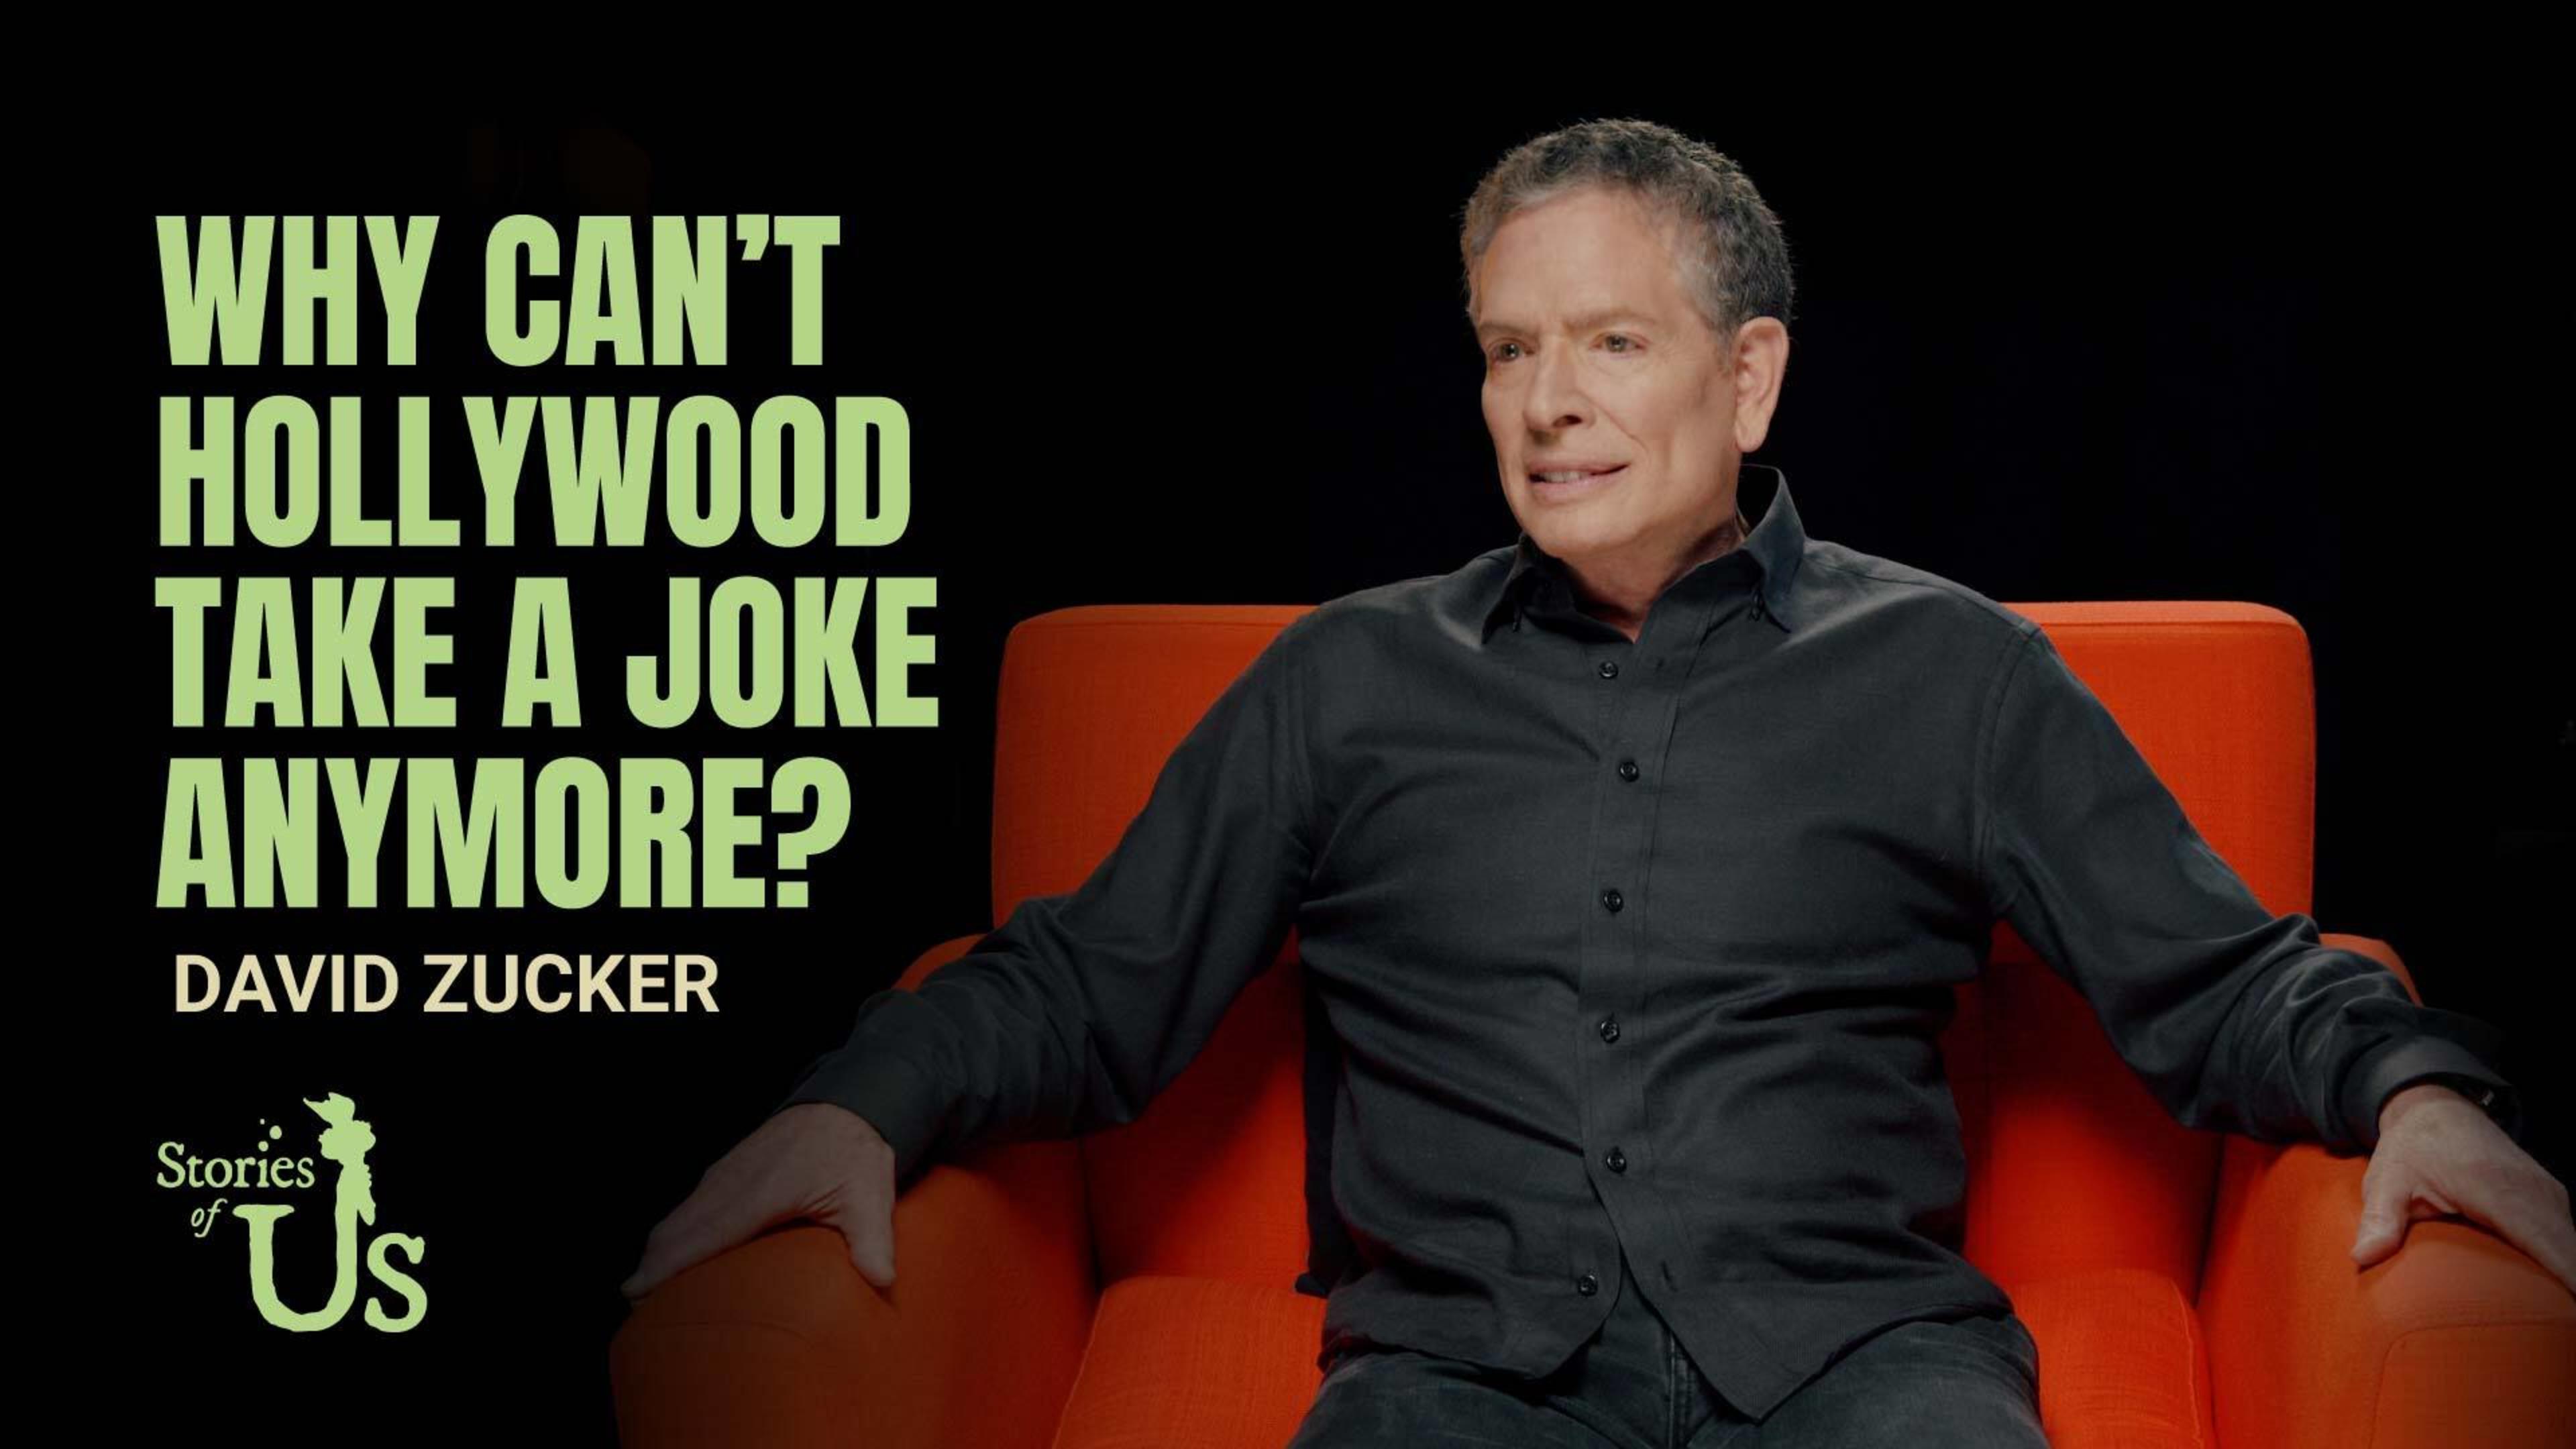 David Zucker: Why Can’t Hollywood Take a Joke Anymore?